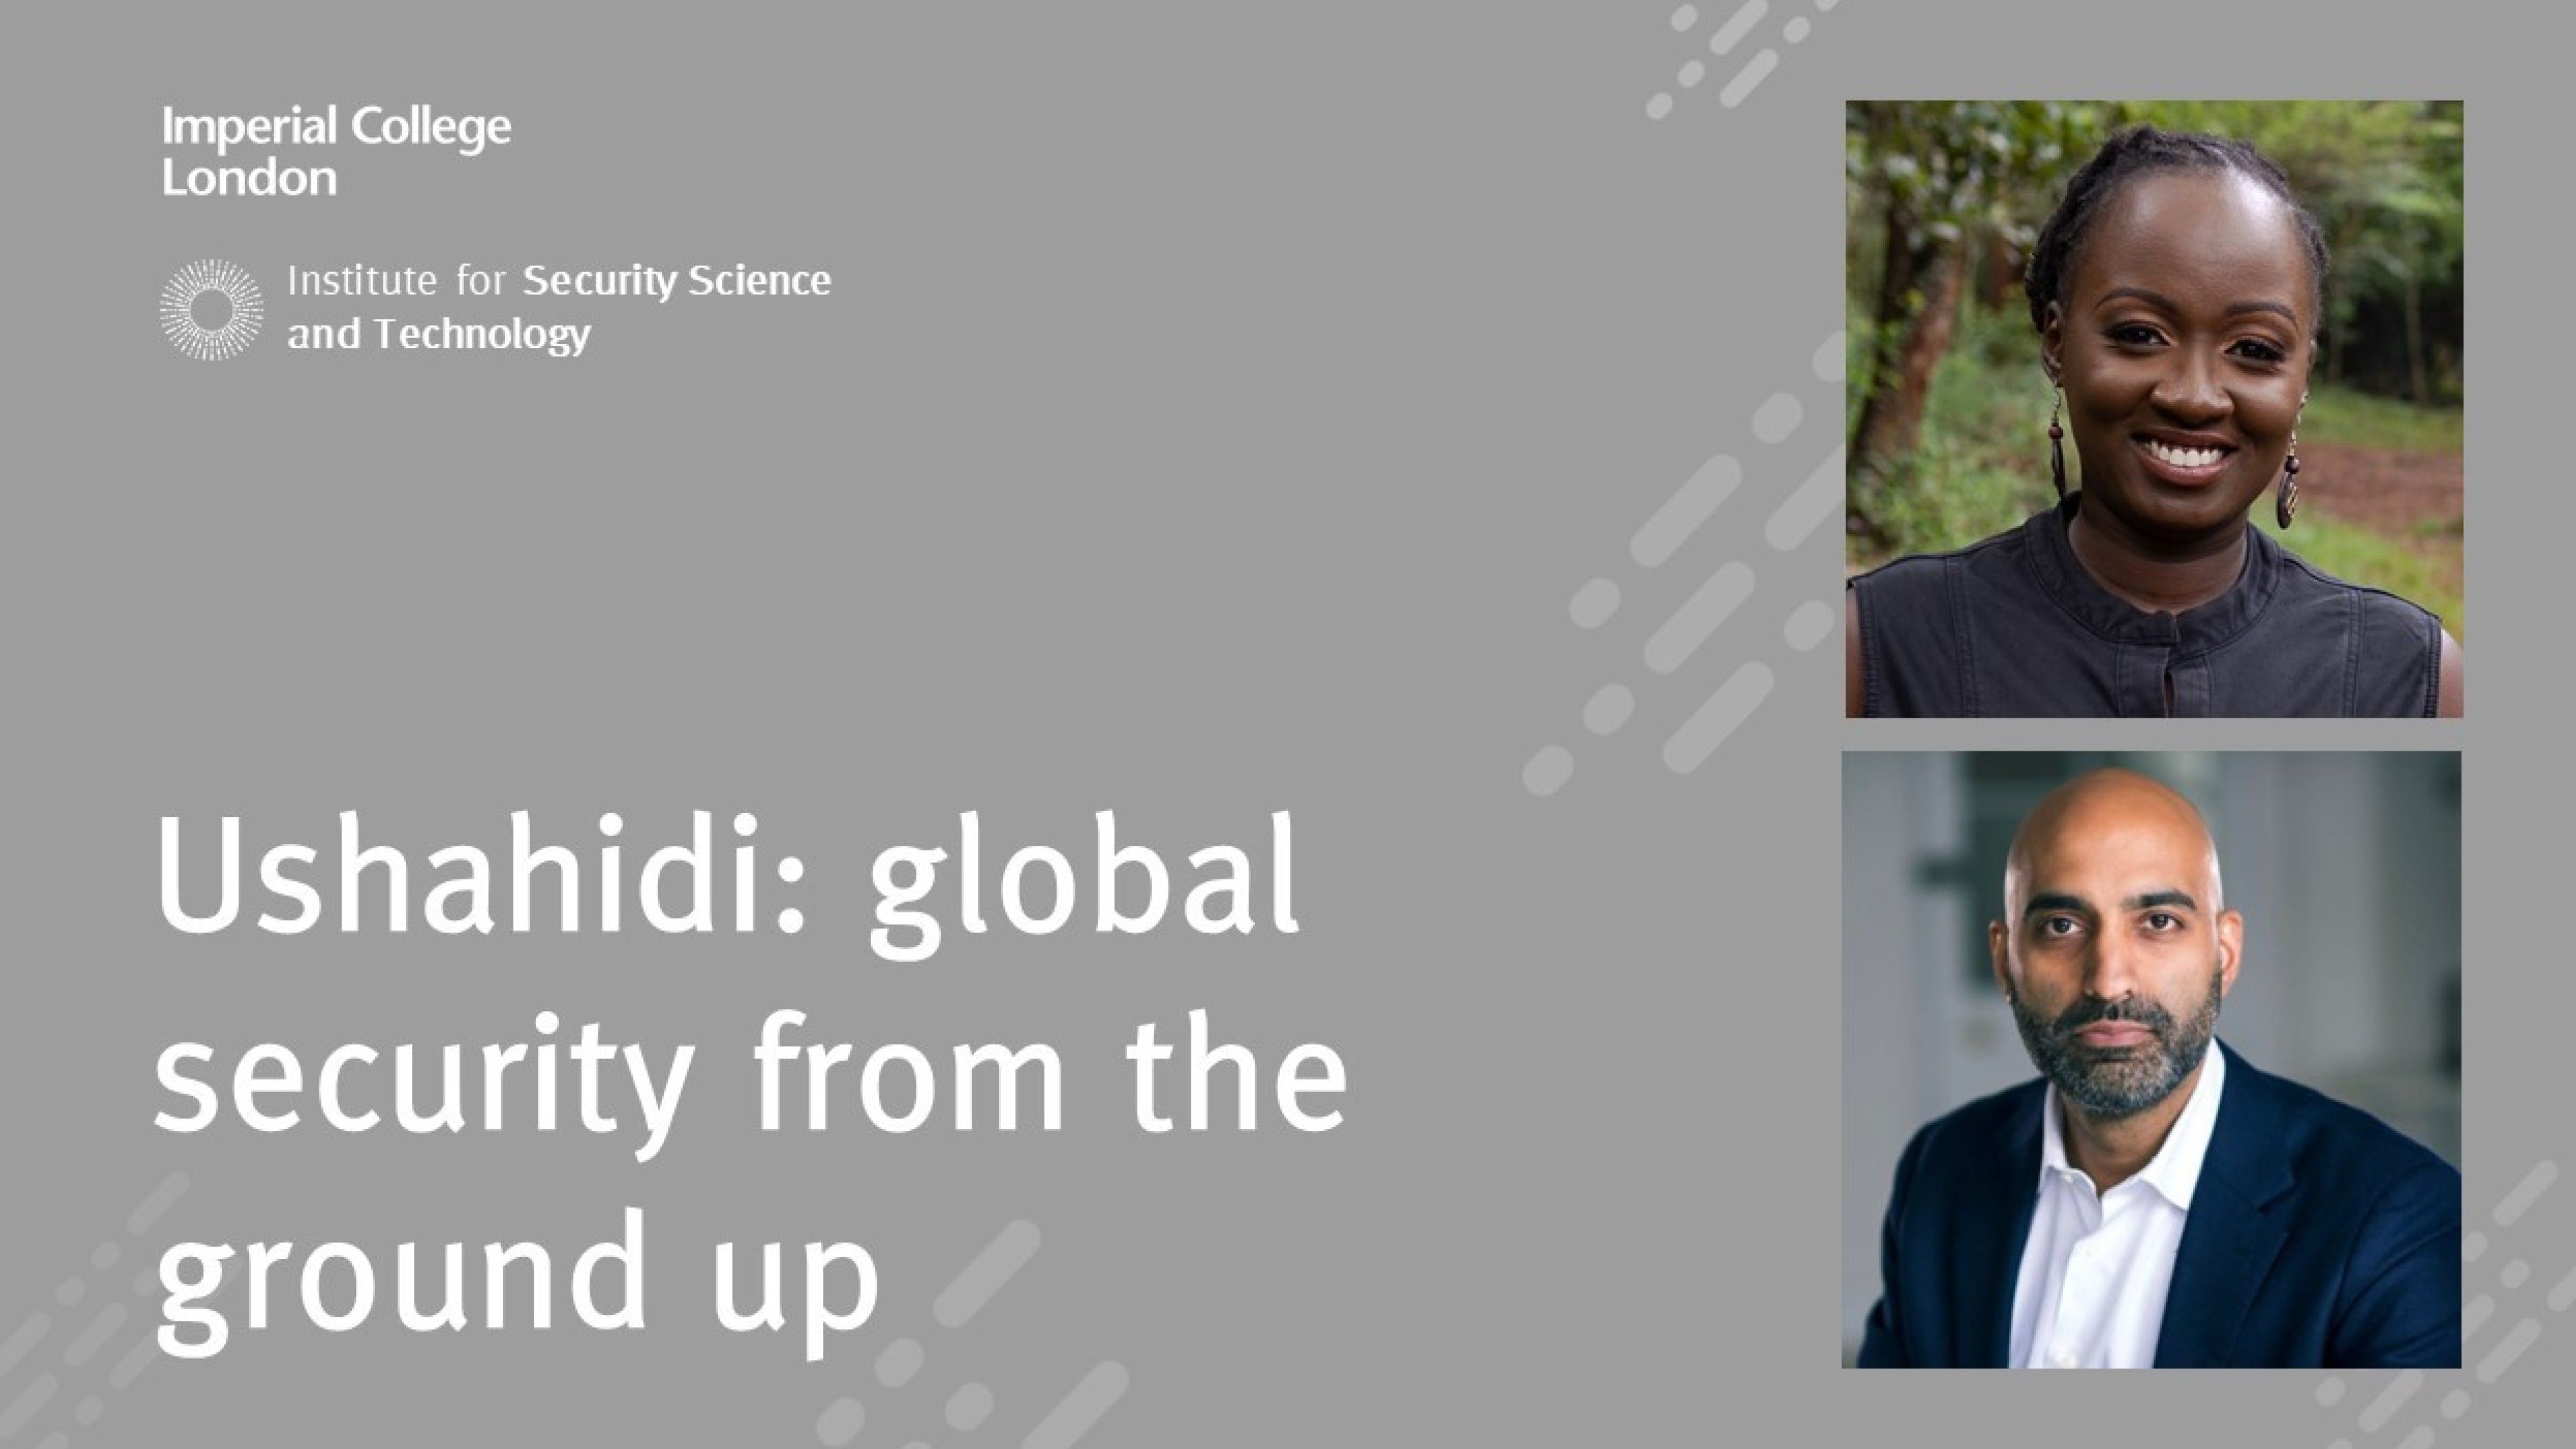 Ushahidi: global security from the ground up